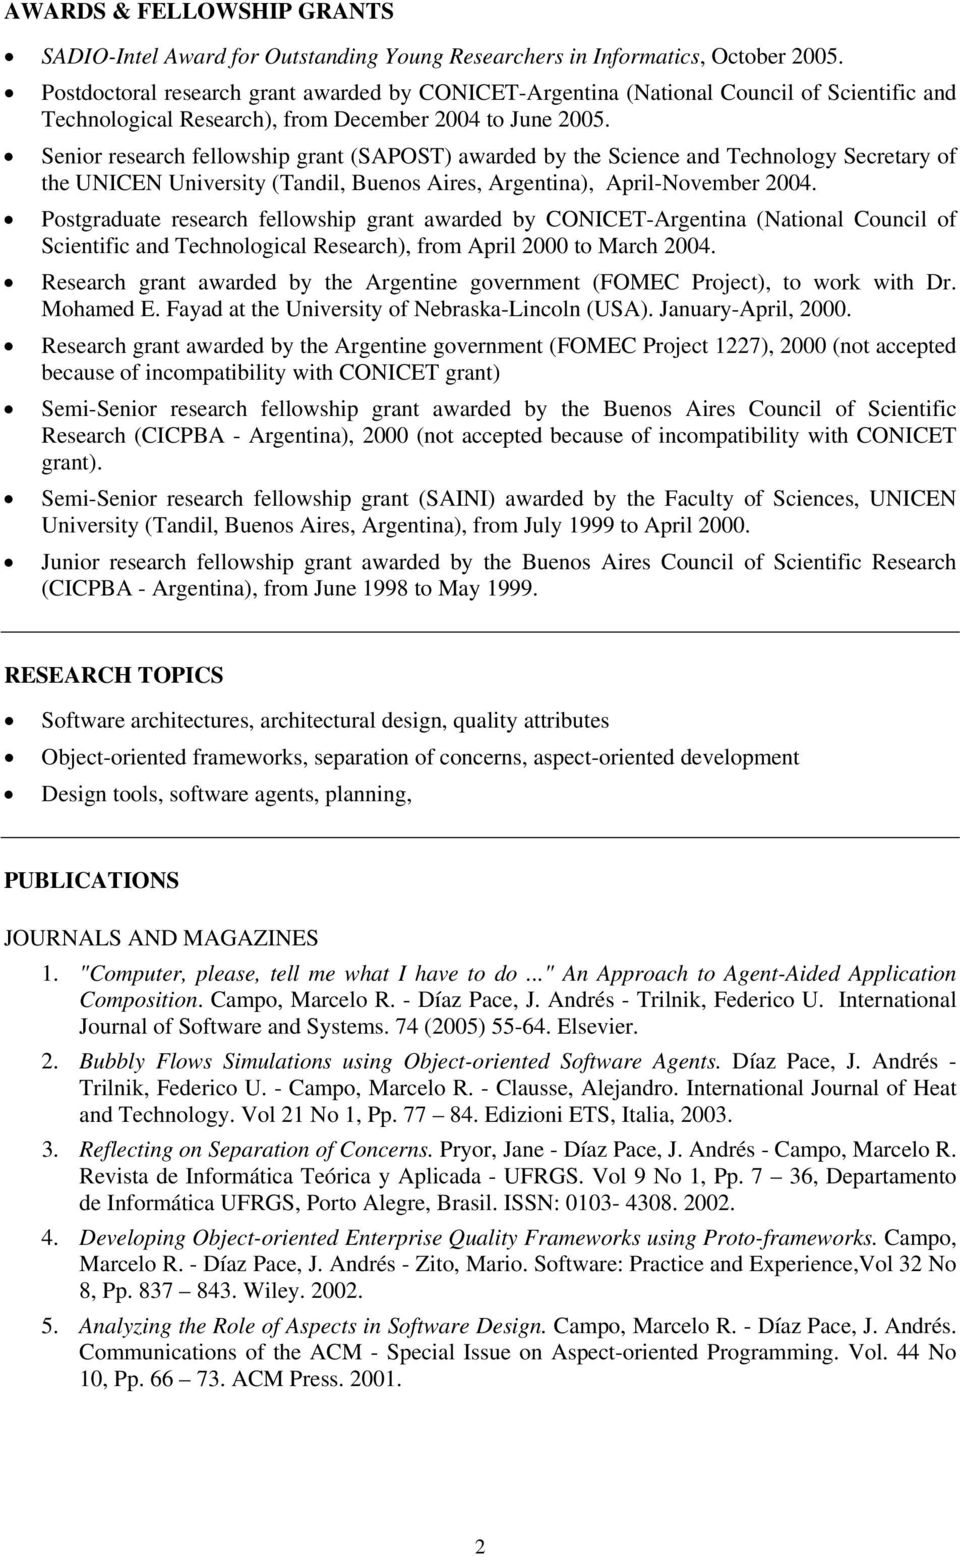 Senior research fellowship grant (SAPOST) awarded by the Science and Technology Secretary of the UNICEN University (Tandil, Buenos Aires, Argentina), April-November 2004.